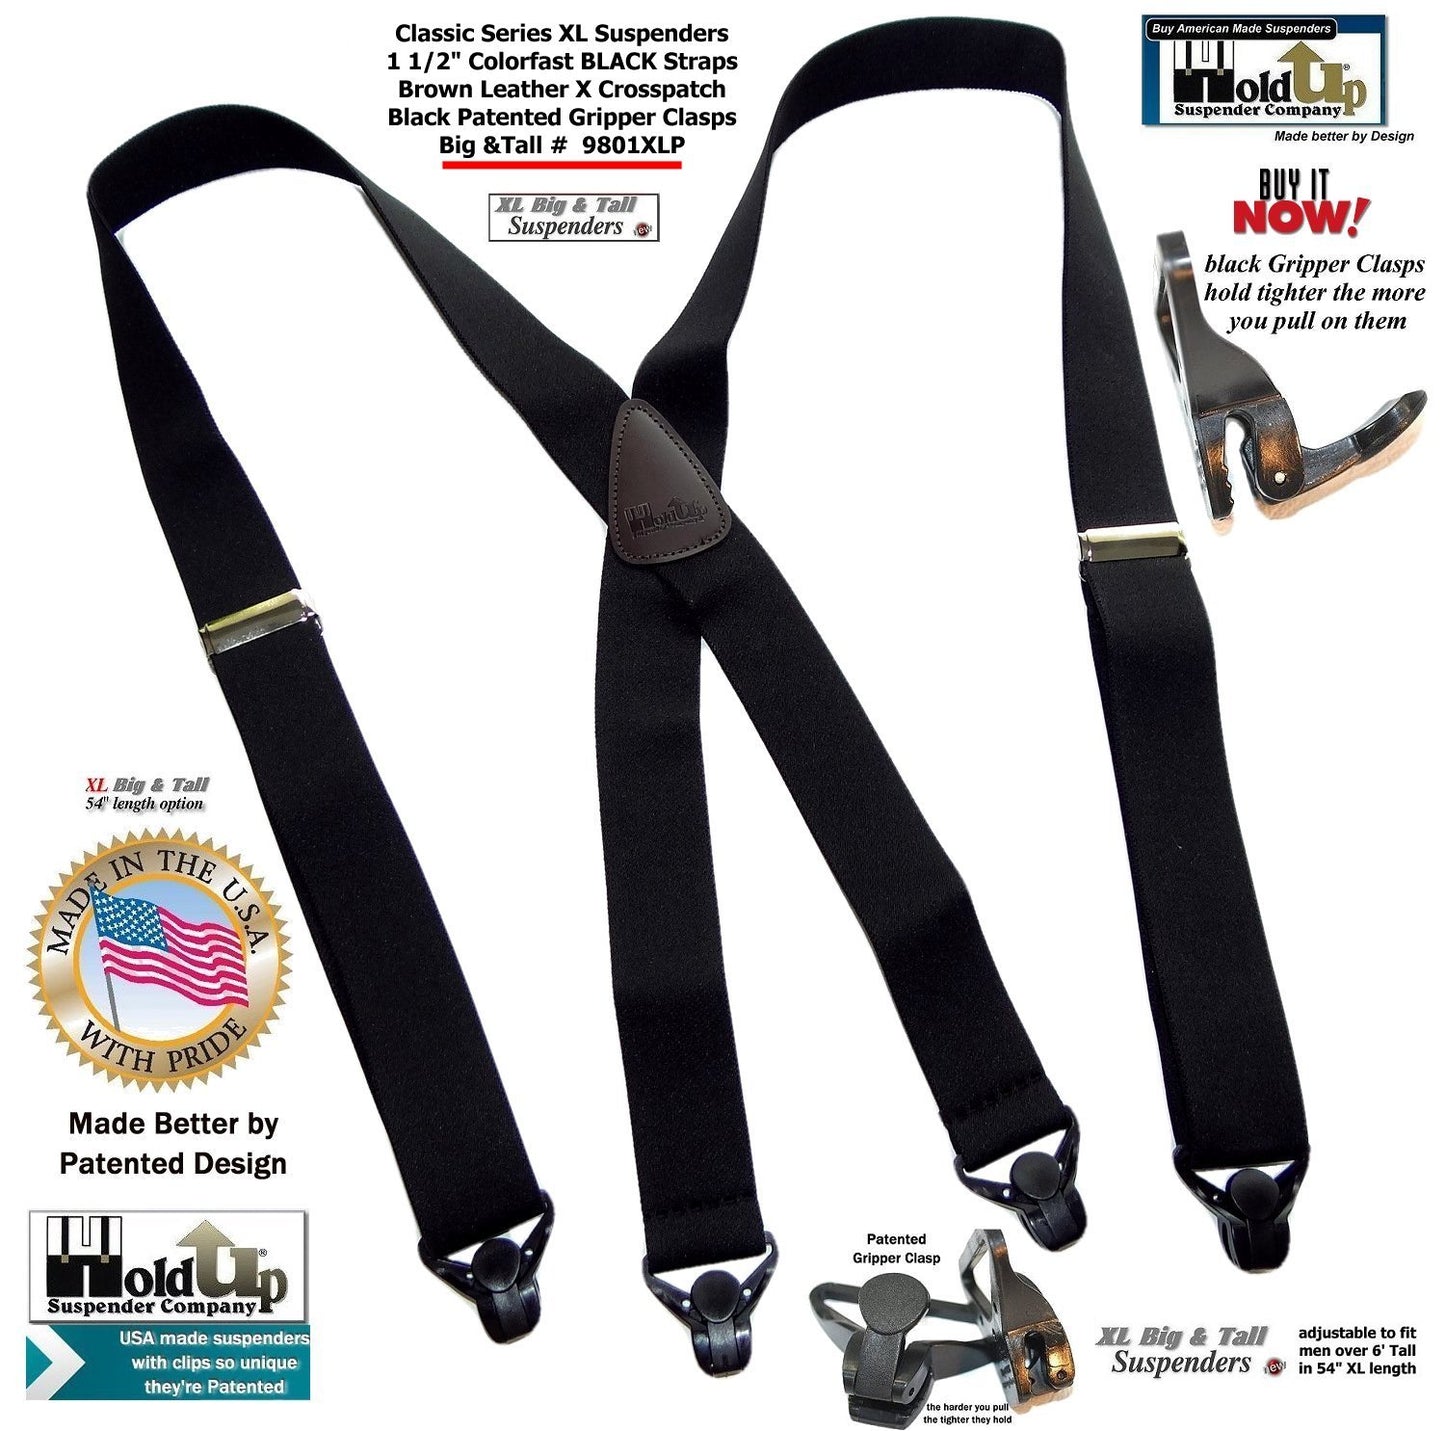 Holdup Brand XL Classic Series Basic Black X-back Suspenders with Patented black Gripper Clasps